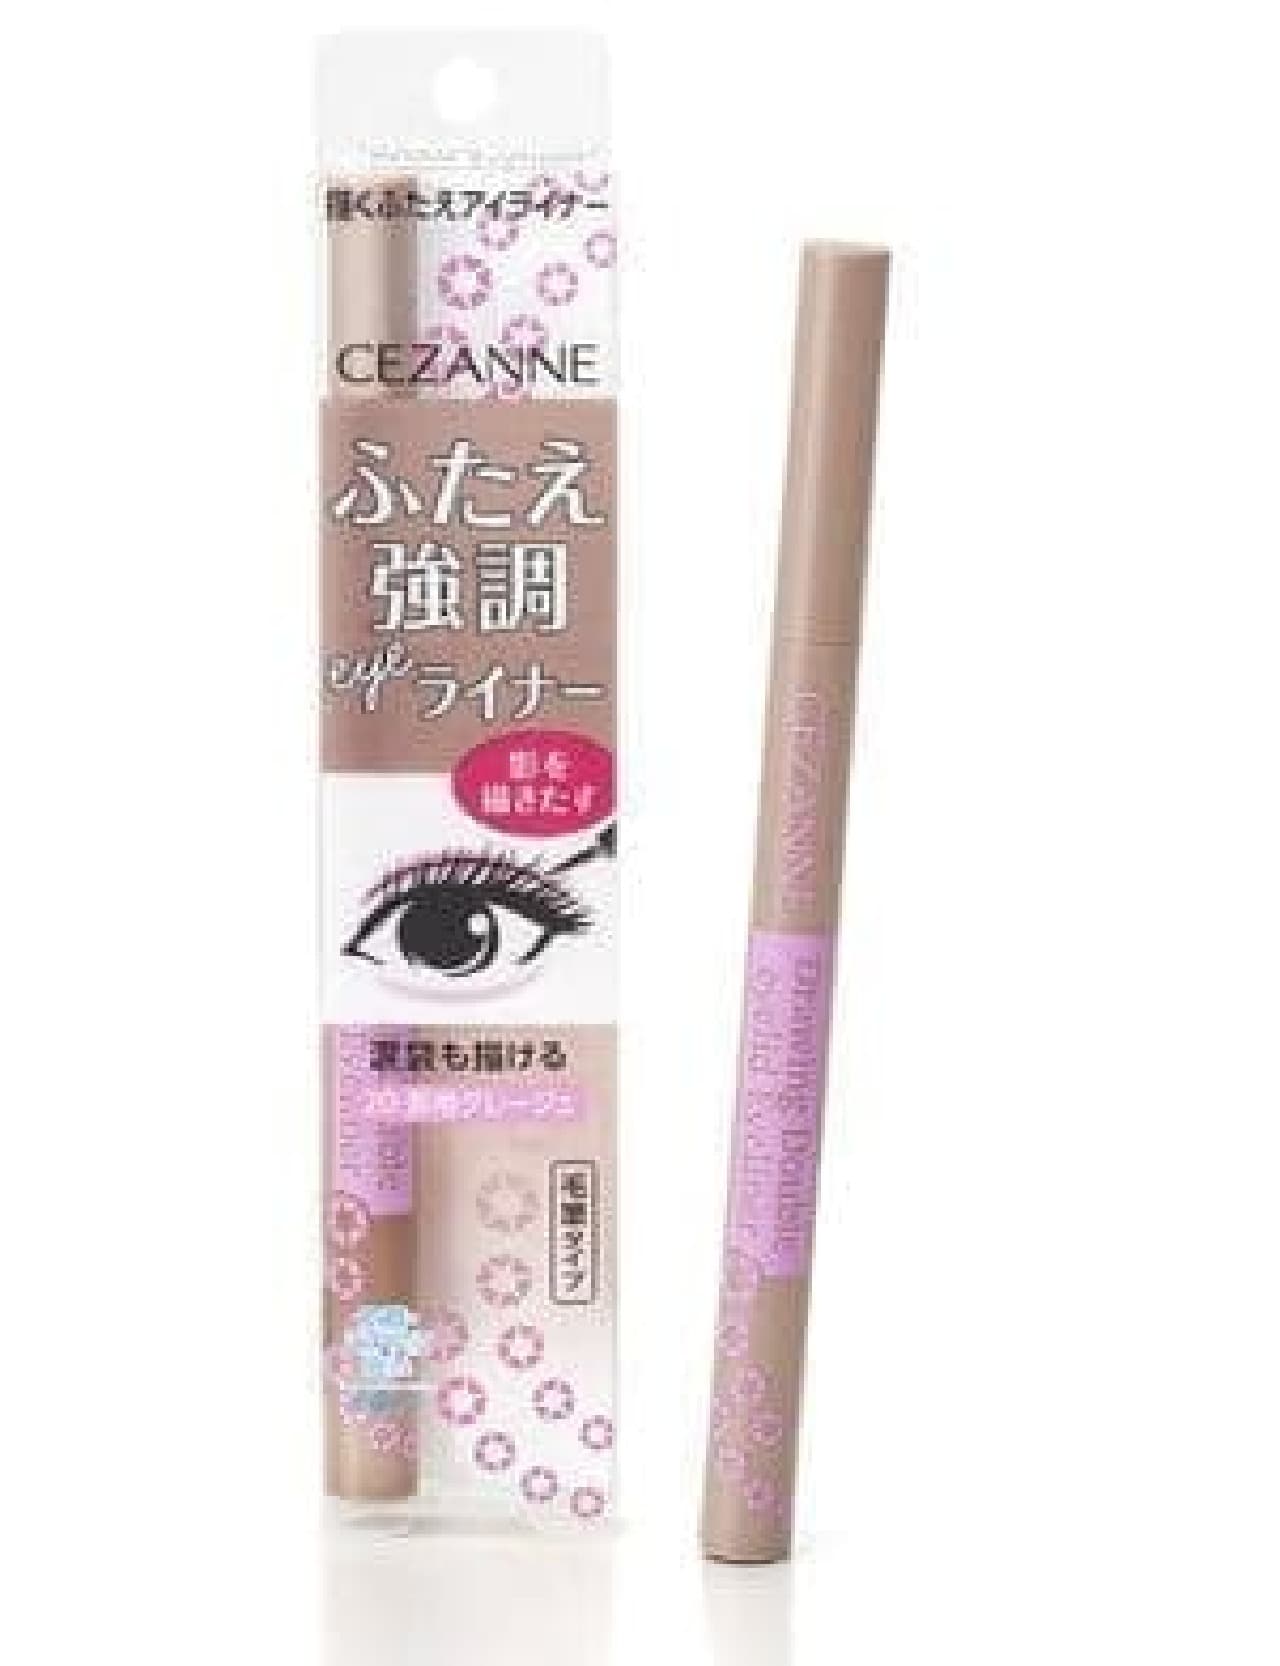 Cezanne Cosmetics "Drawing Double Eyeliner" New Color "20 Shadow Greige"